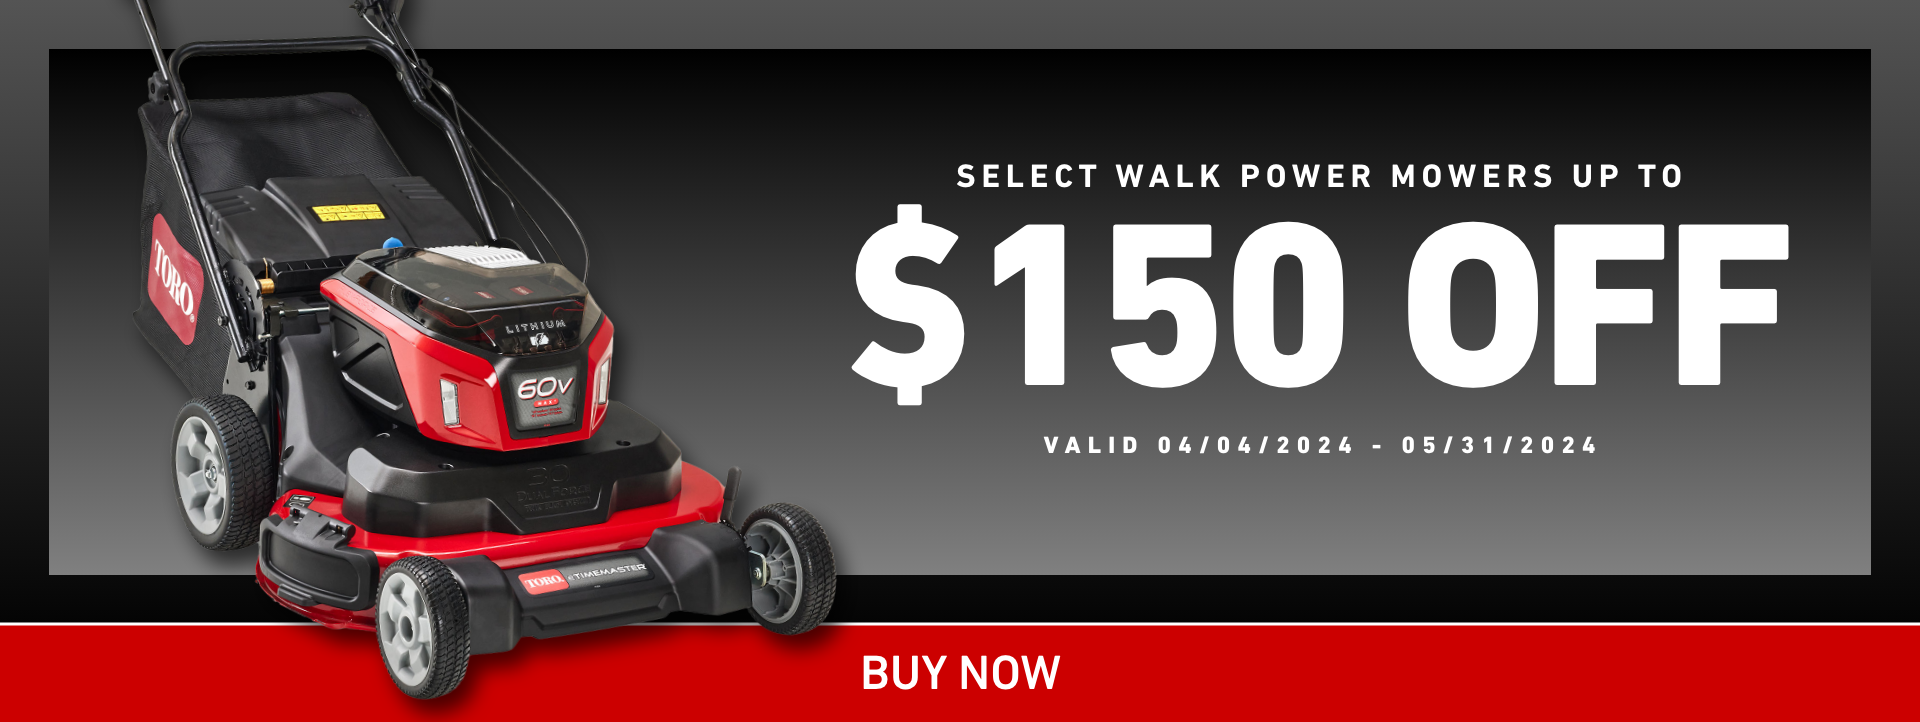 Toro Spring Sale - Save up to $150 off select walk power mowers